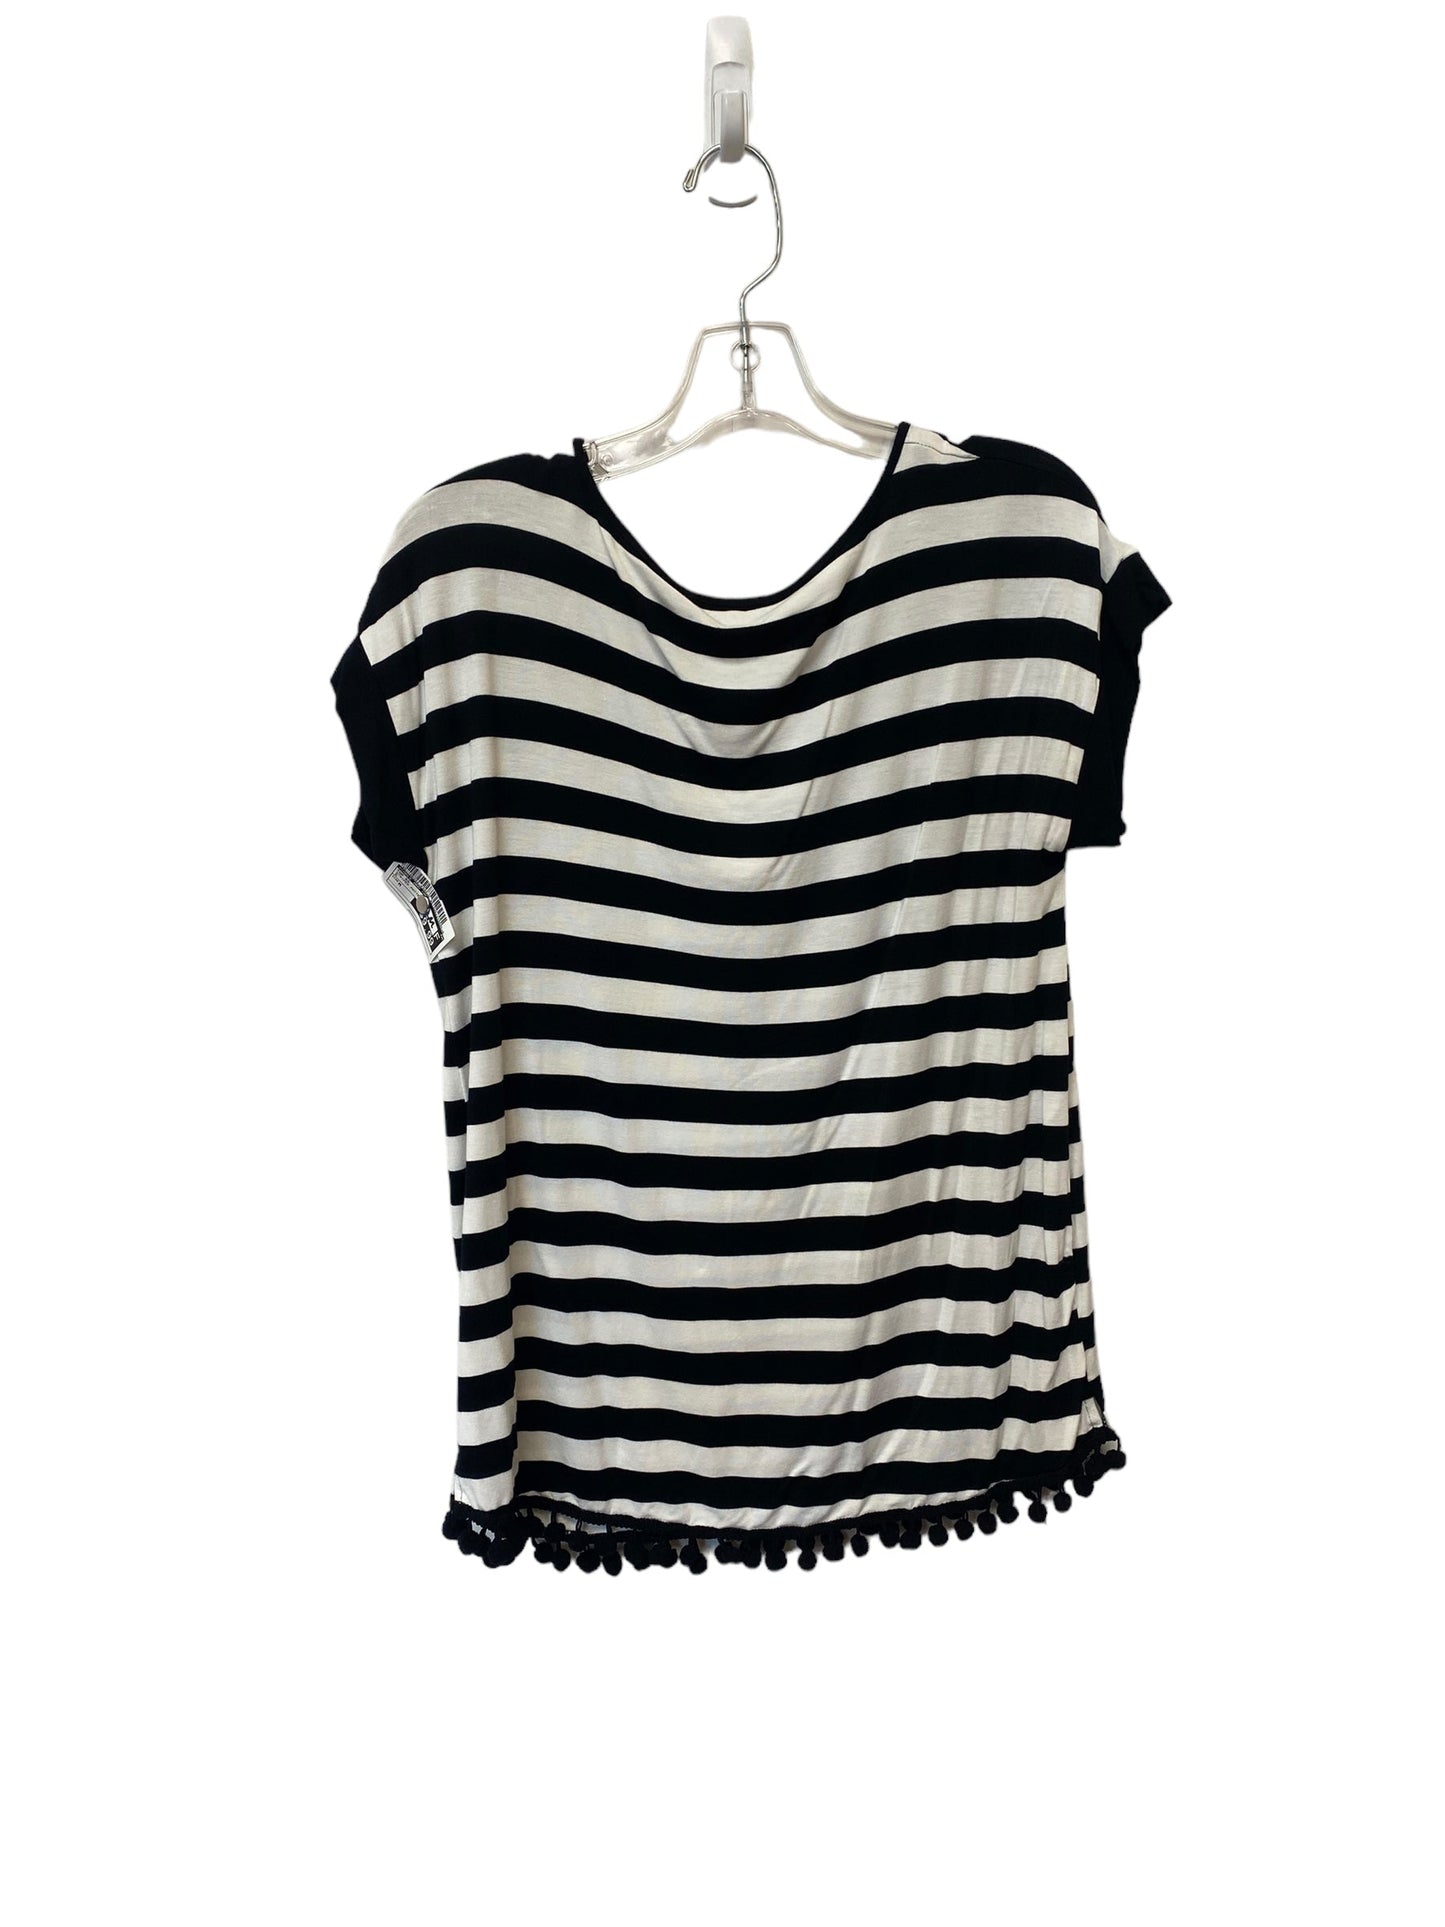 Striped Pattern Top Short Sleeve Cable And Gauge, Size M